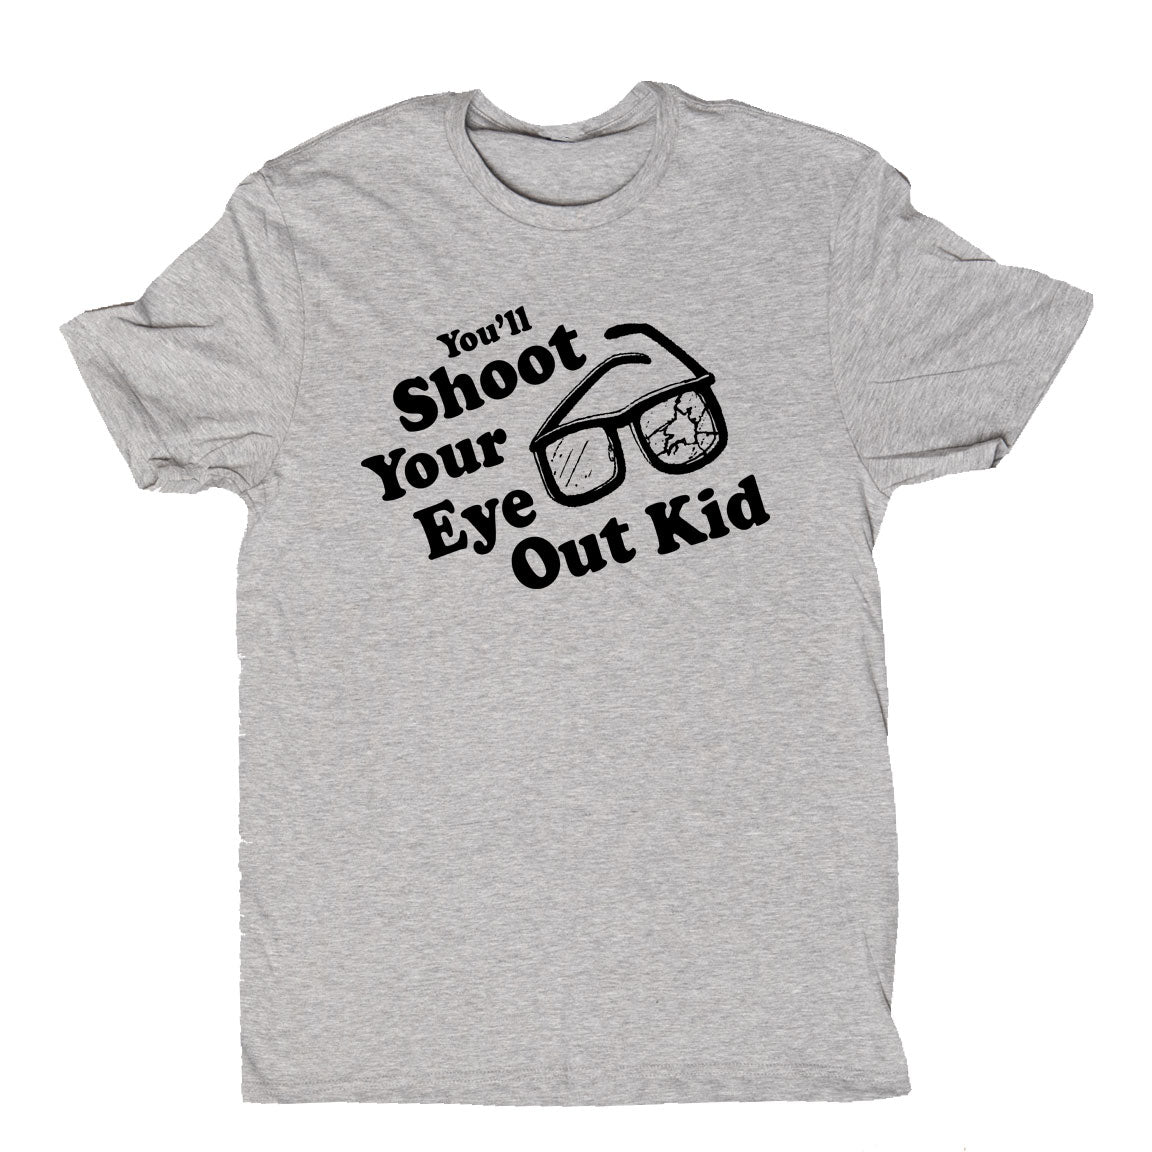 You'll Shoot Your Eye Out Kid! Grey T-shirt